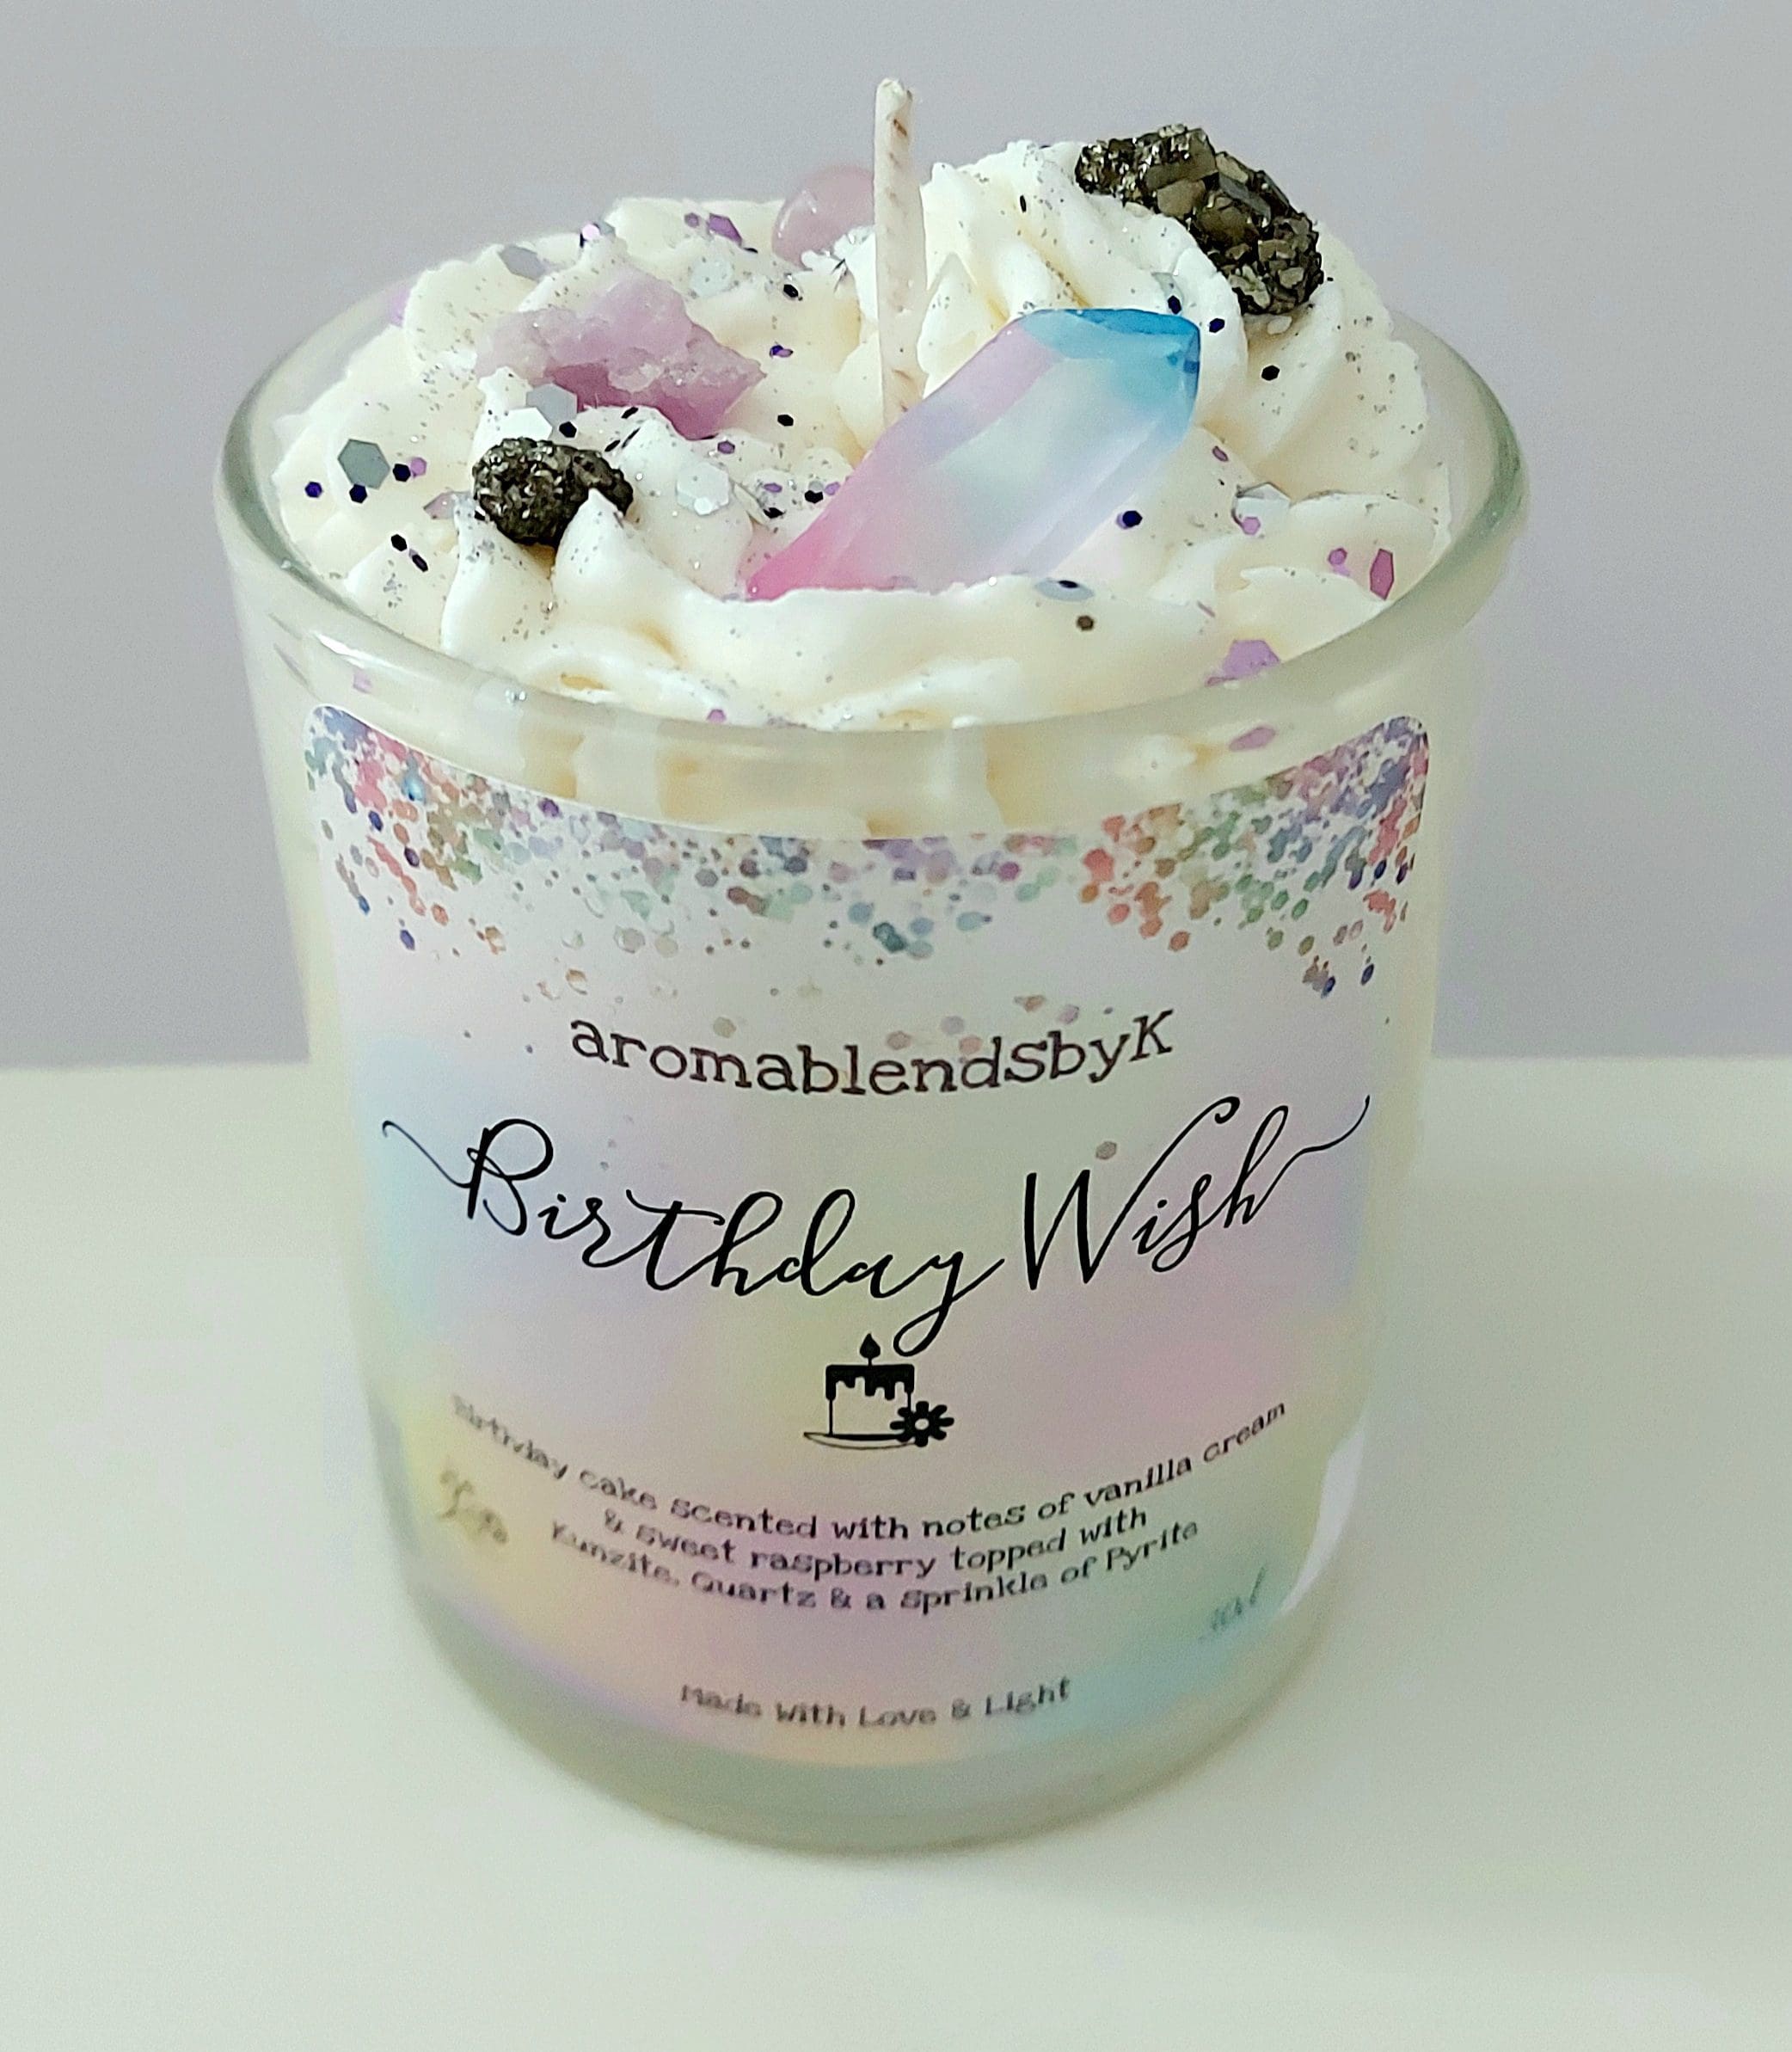 Birthday wish crystal candle, crystal, candles, handmade candles, black-owned candles, candles with crystals inside